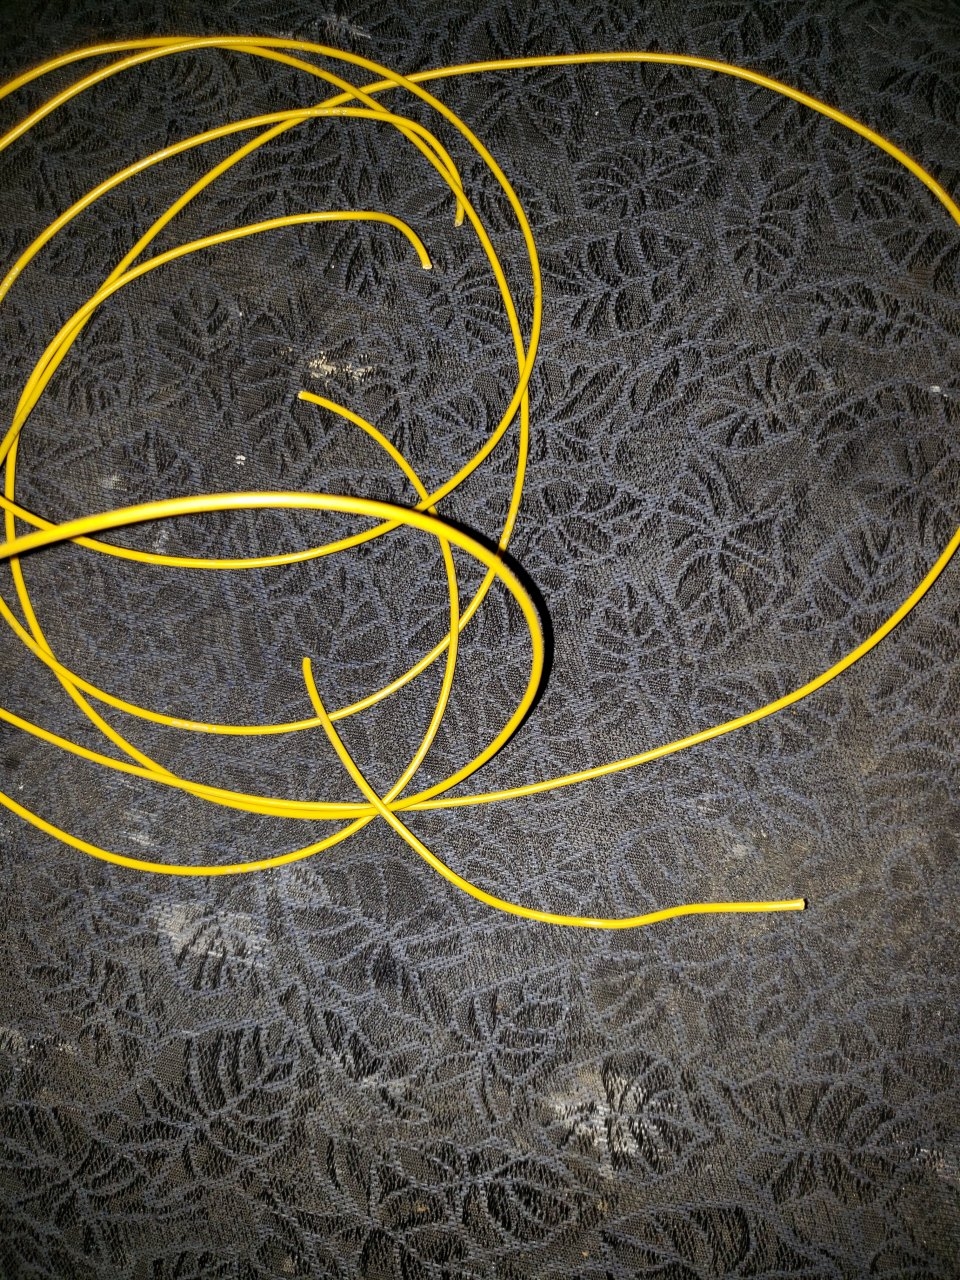 Will 20g stranded wire work with a QB light